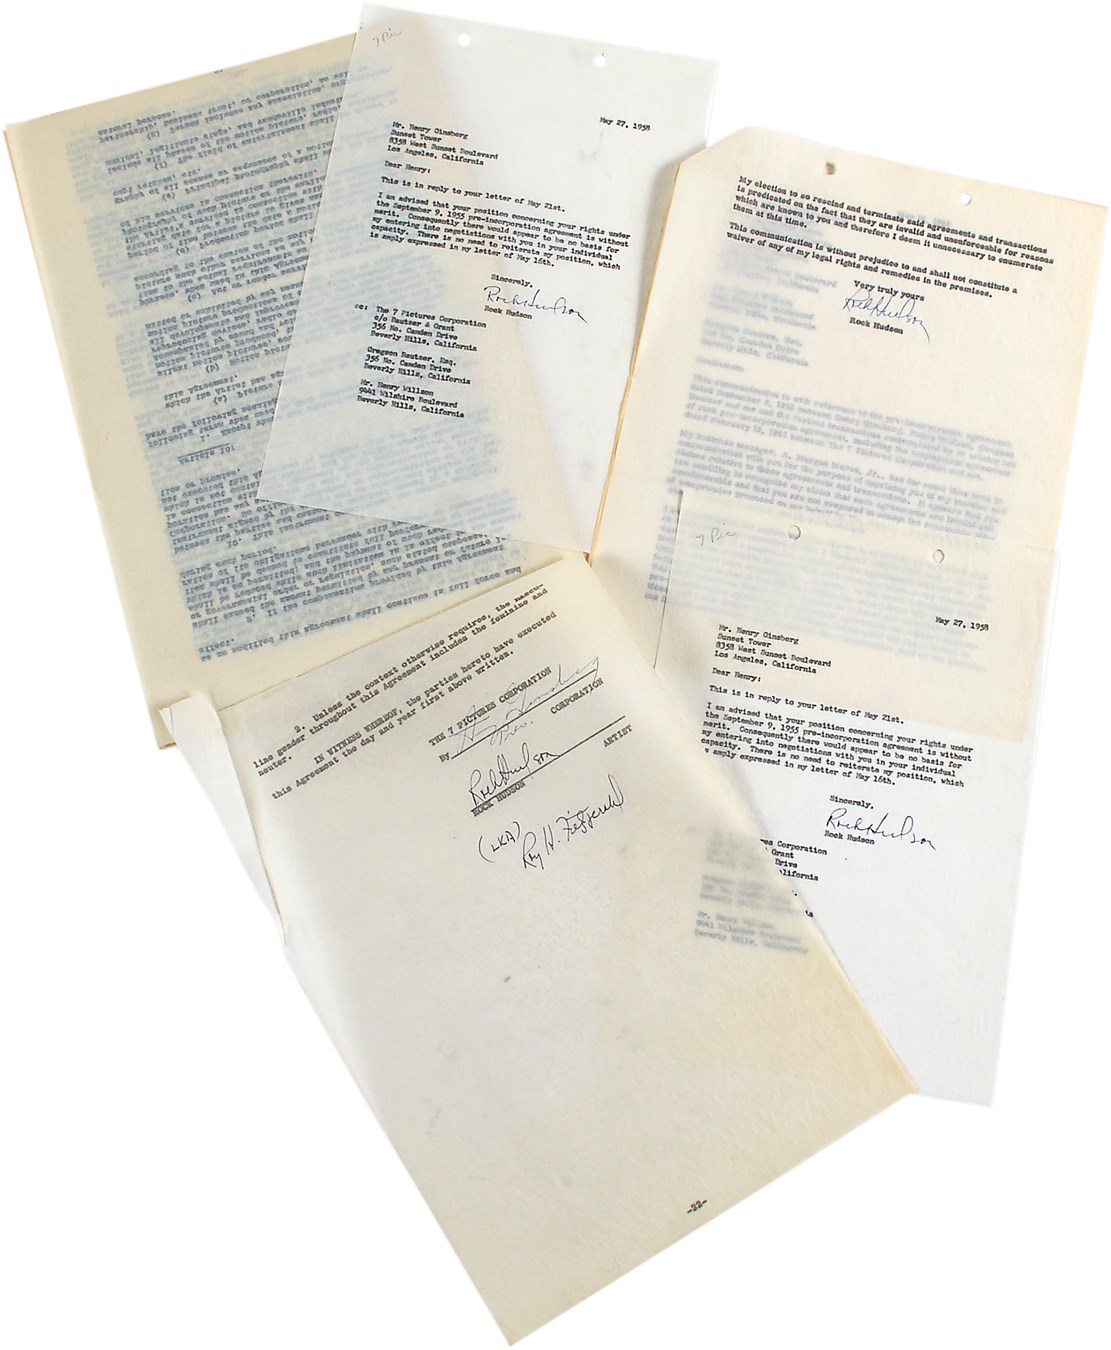 - 1956-58 Rock Hudson Signed Letters & Contract for Forming His Own Production Company (ex-Rock Hudson Estate)